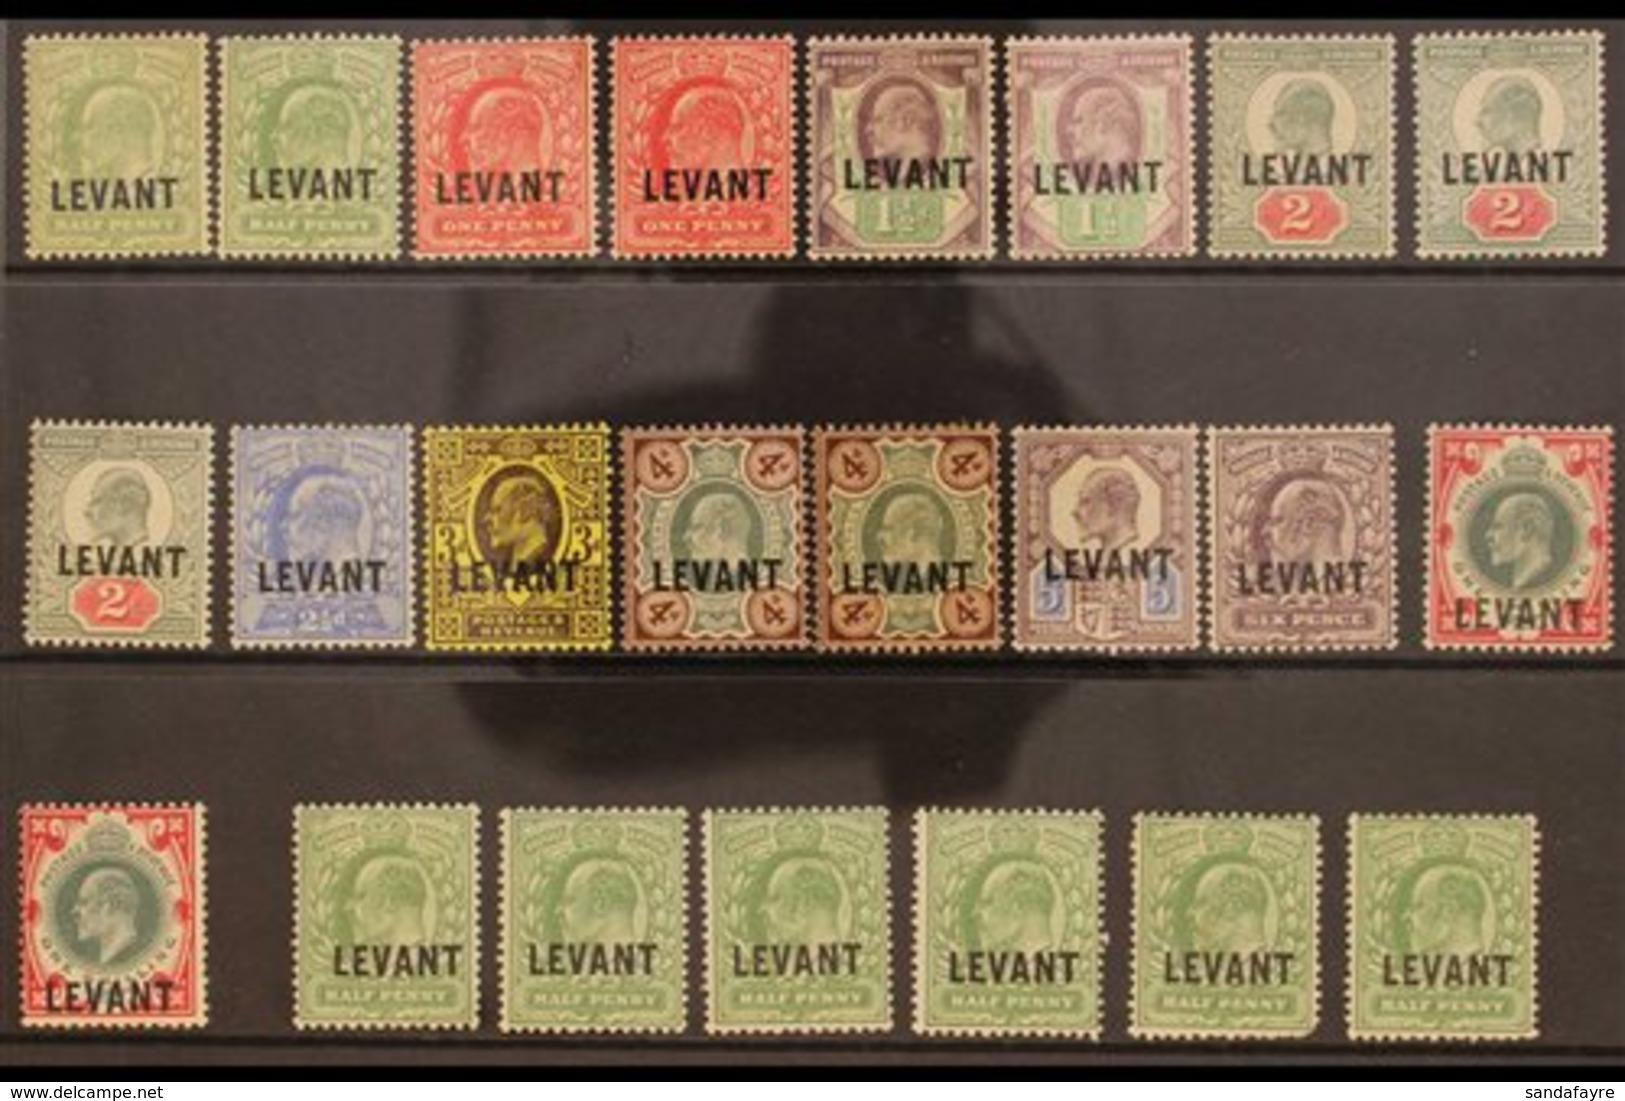 BRITISH CURRENCY 1905 - 12 Overprint Set Complete Including Shades And Papers Including Harrison Printings, SG L1-11, Fi - British Levant